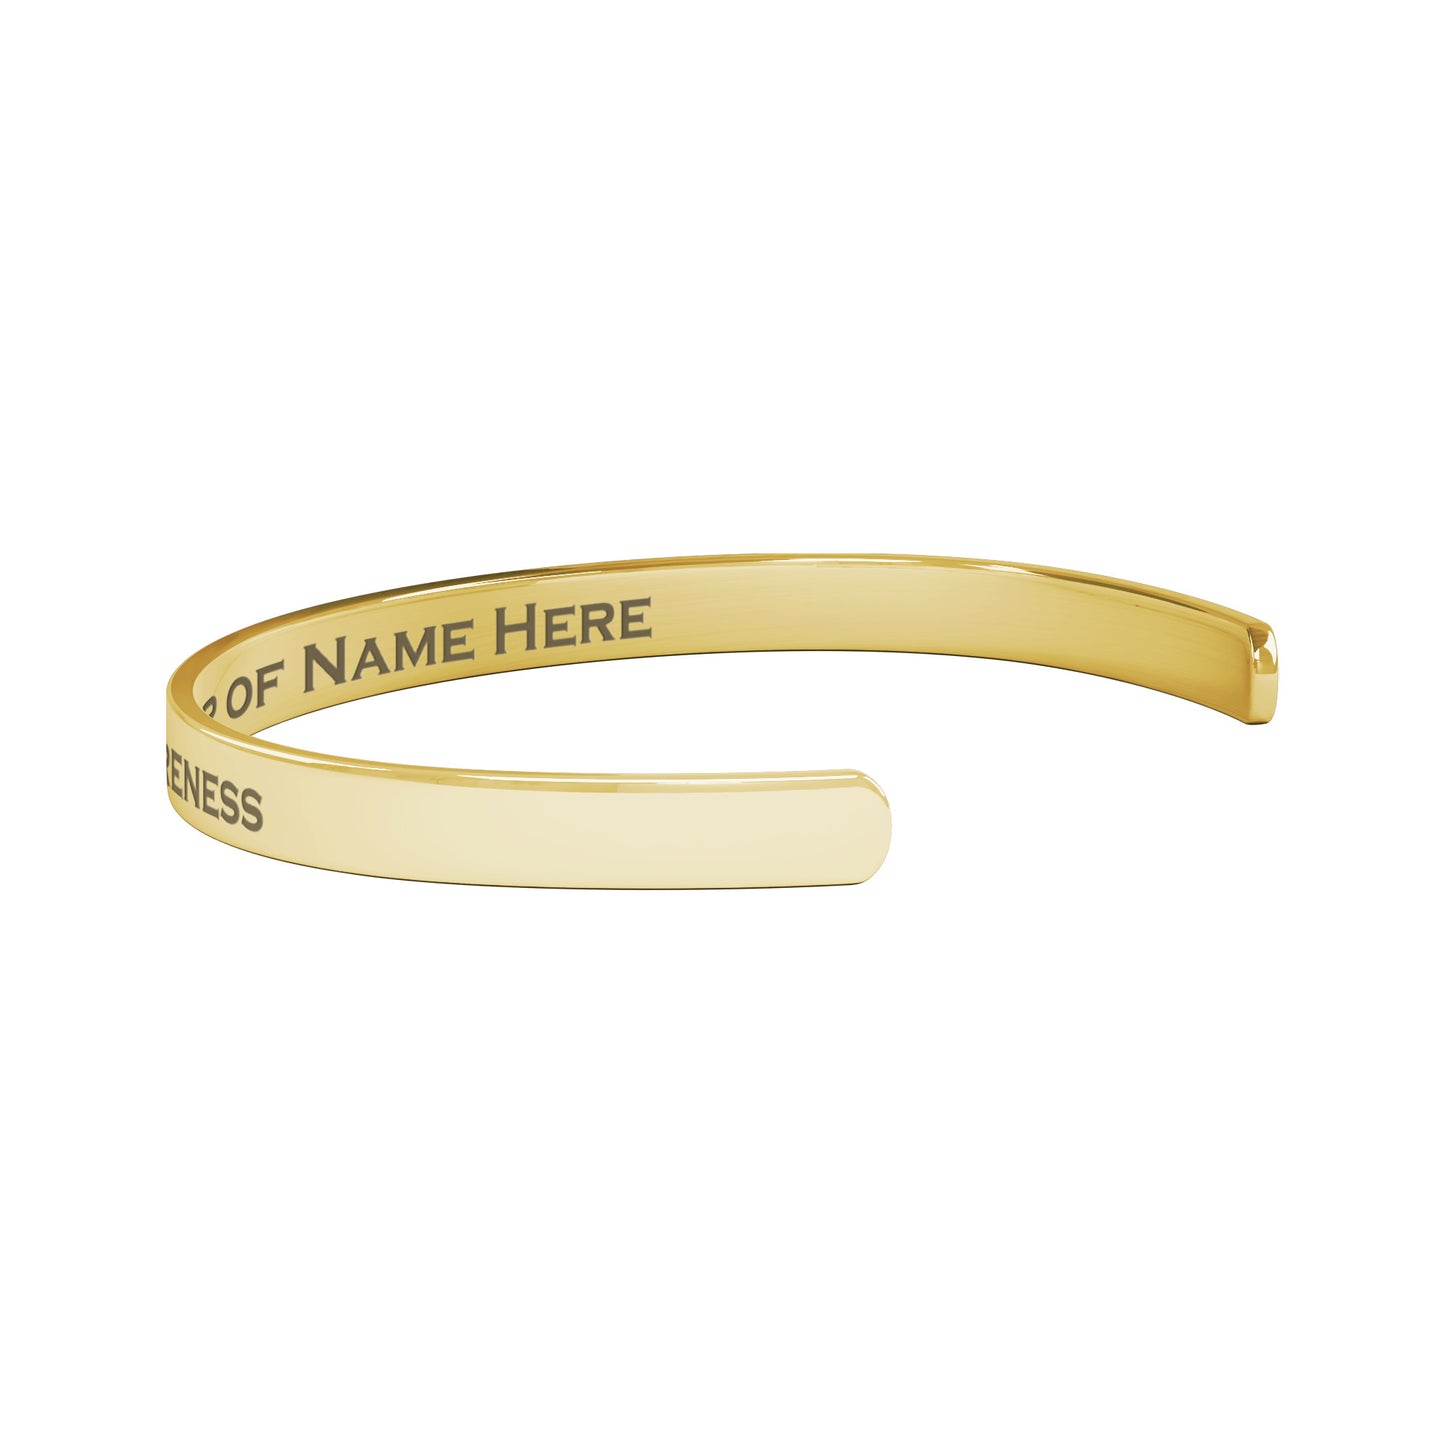 Personalized Stomach Cancer Awareness Cuff Bracelet